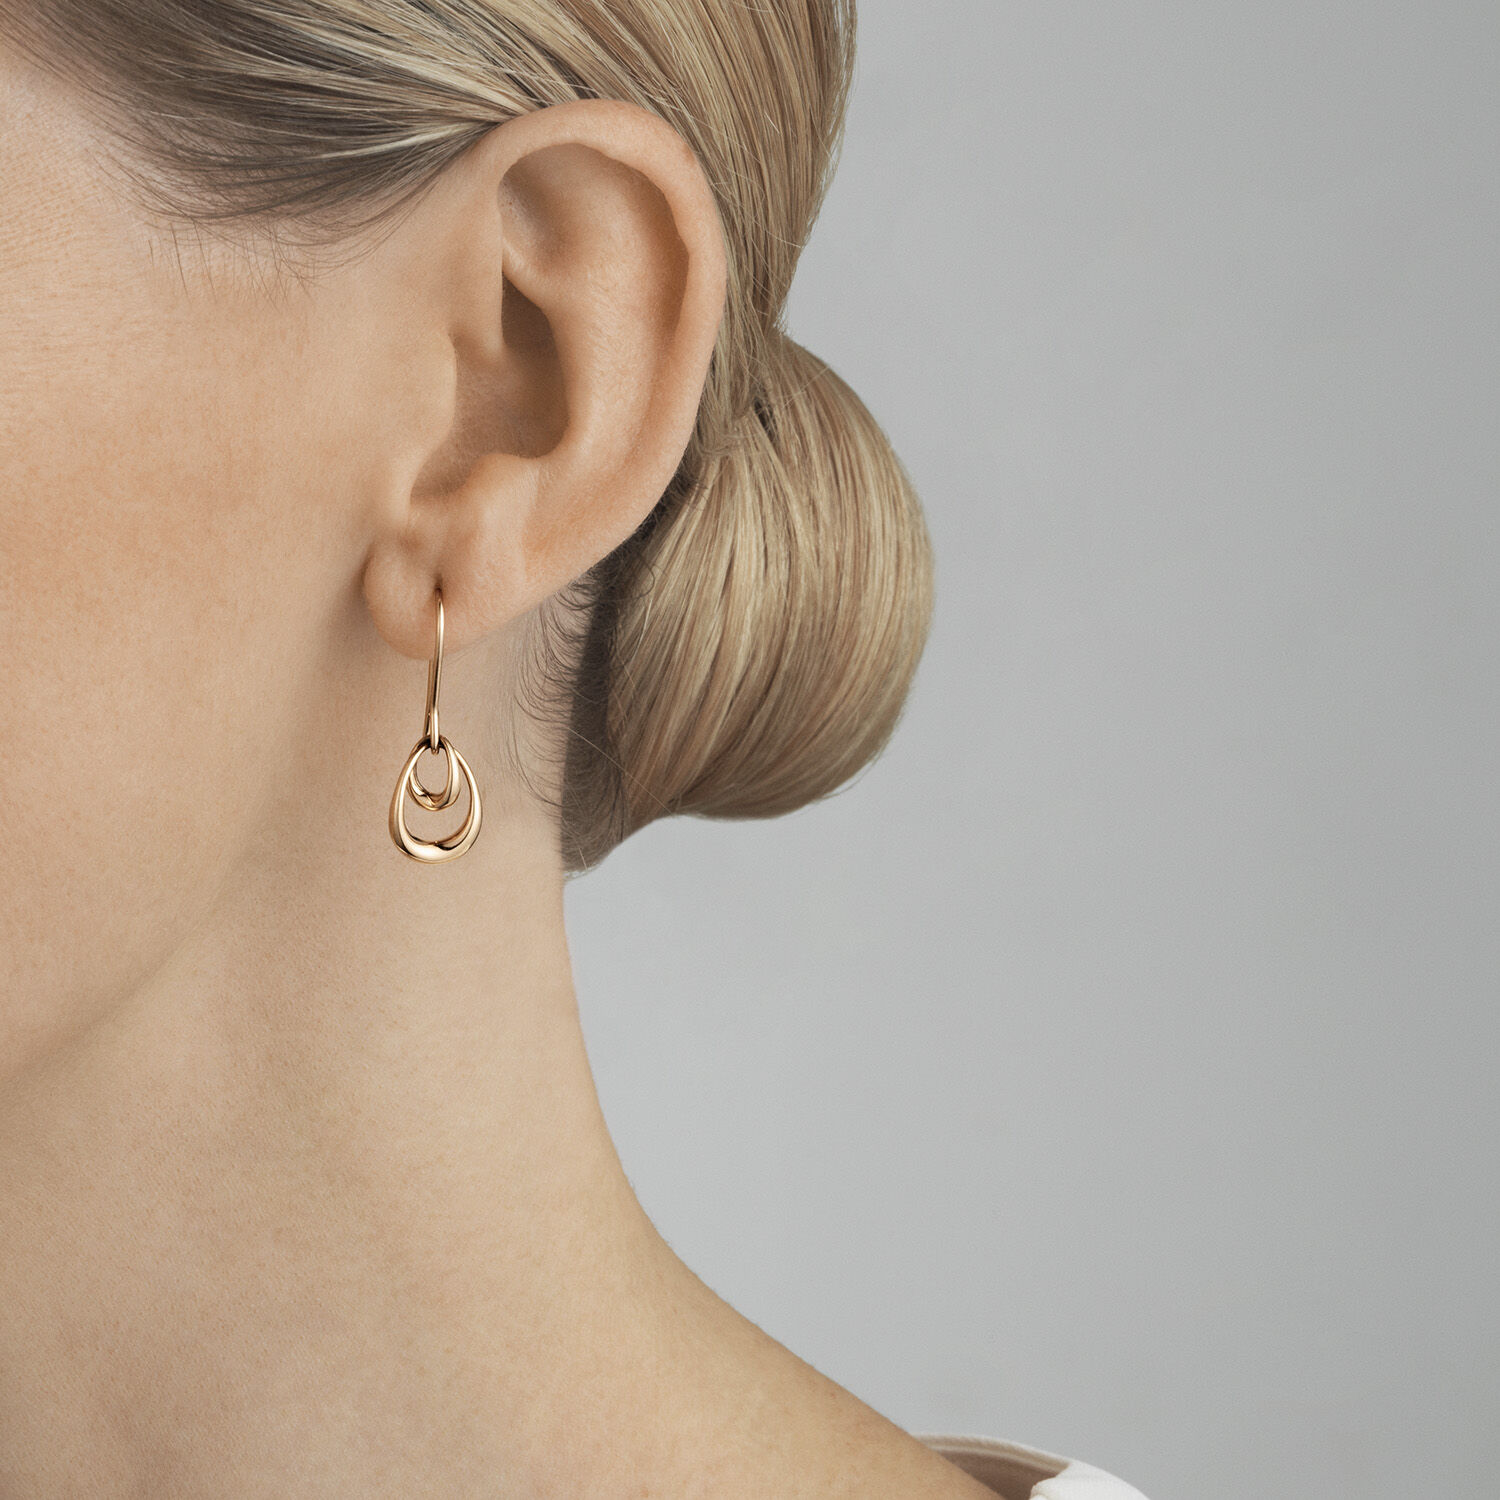 Offspring rose gold mother and daughter earrings I Georg Jensen